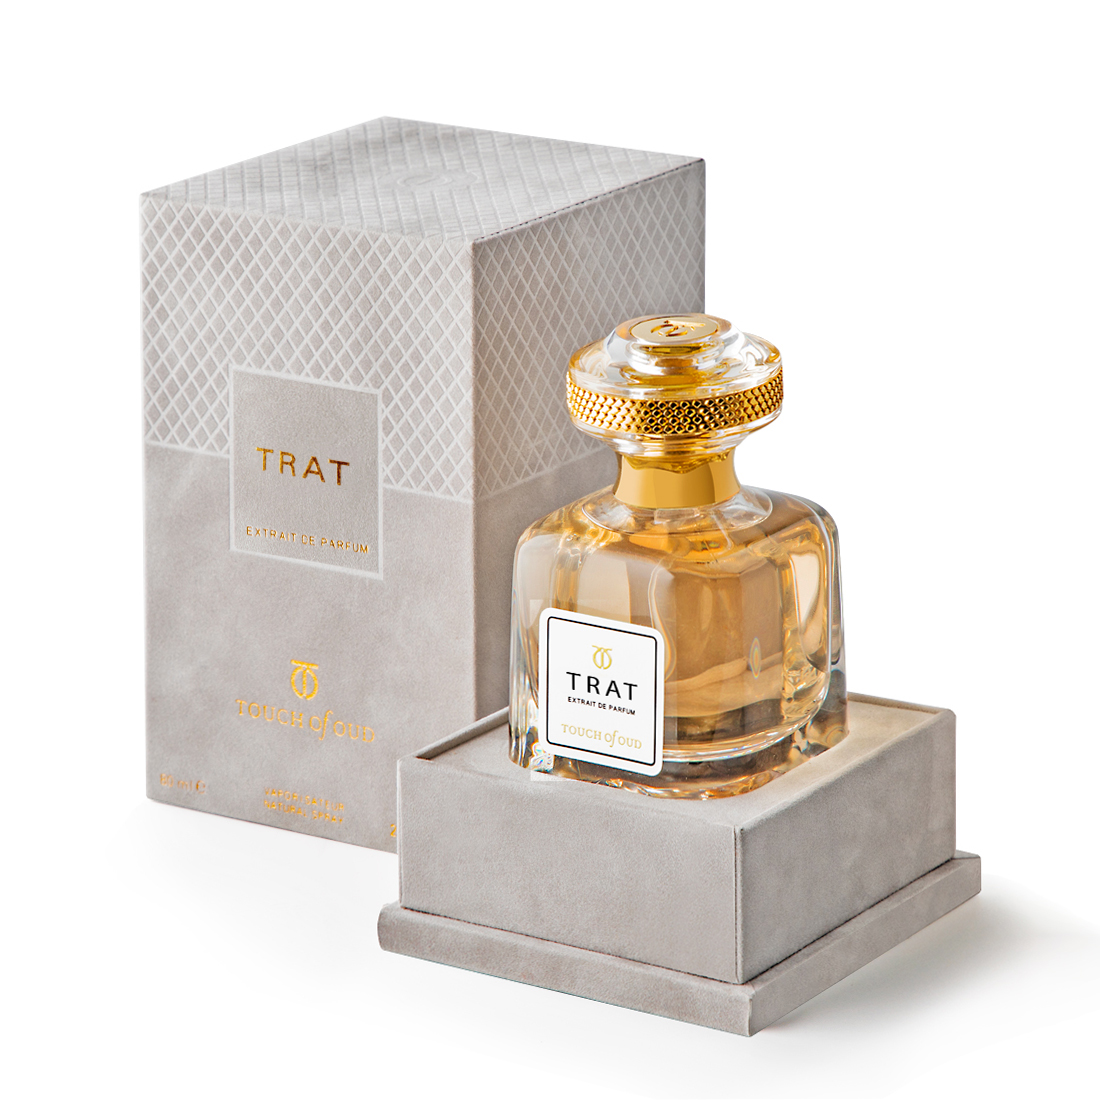 Touch Of Oud Trat EDP 80ml Inside Box